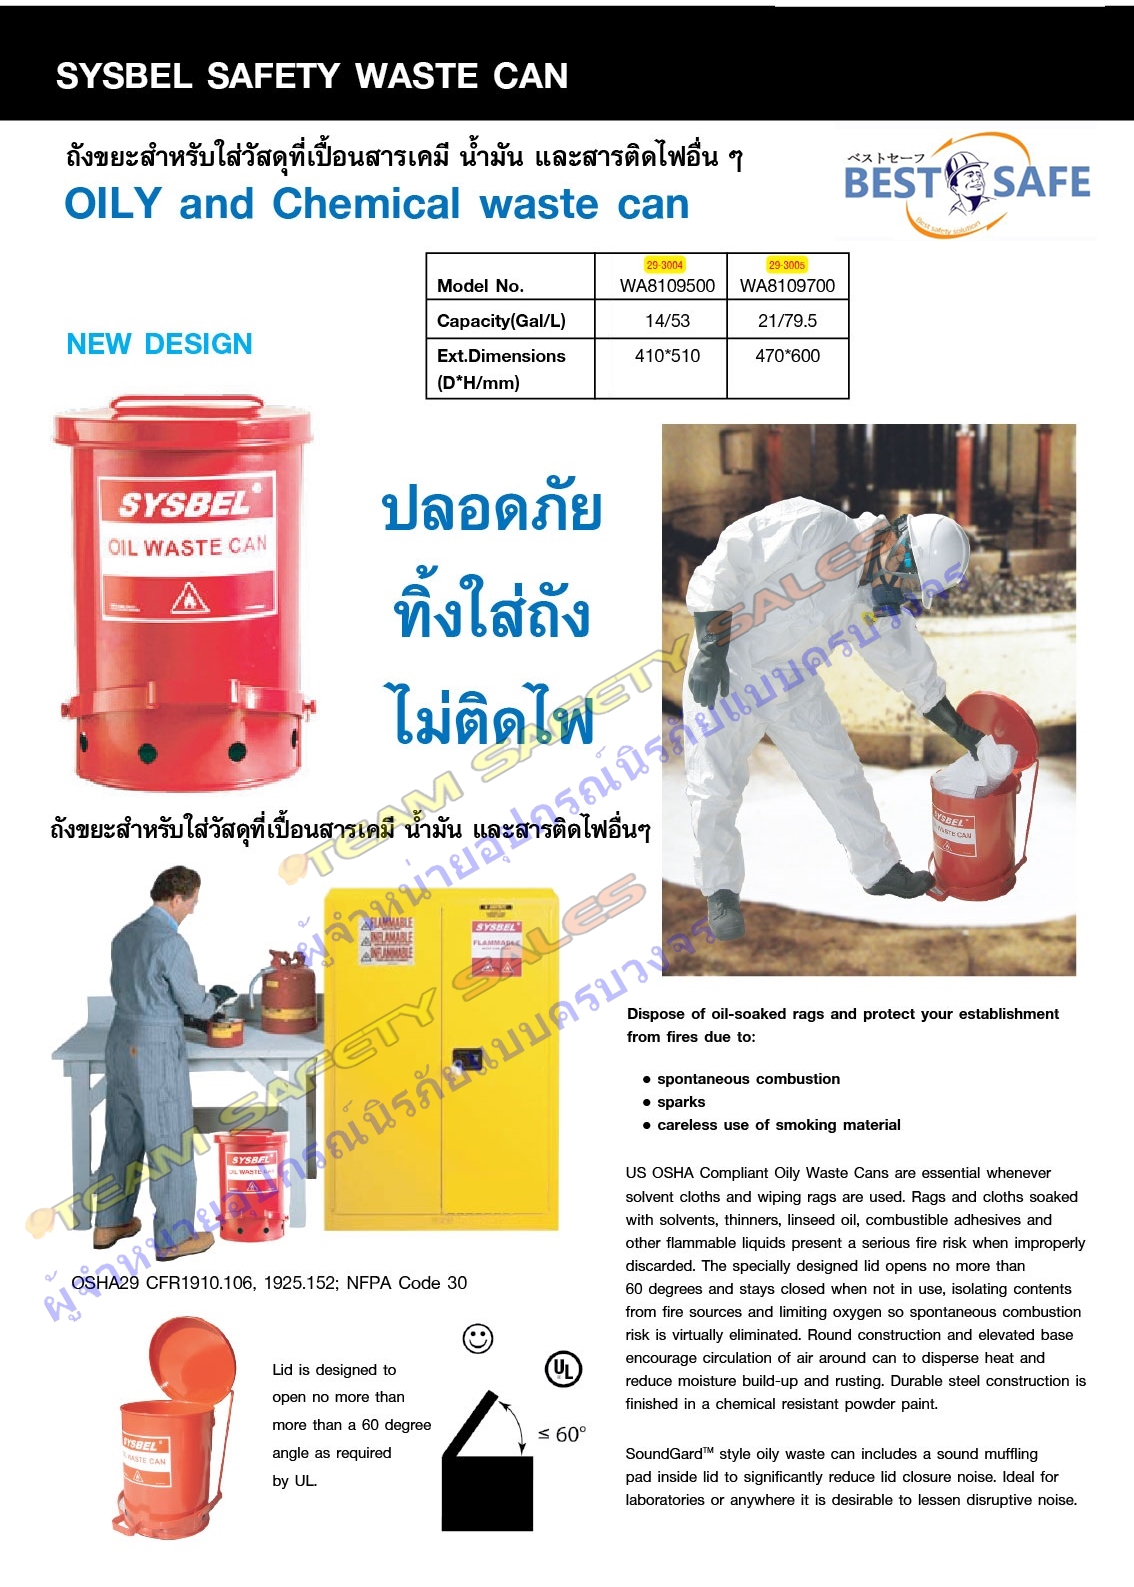 https://www.sysbelthailand.com/wp-content/uploads/2017/08/Sec29-p1-2-safety-waste-can-Copy.jpg